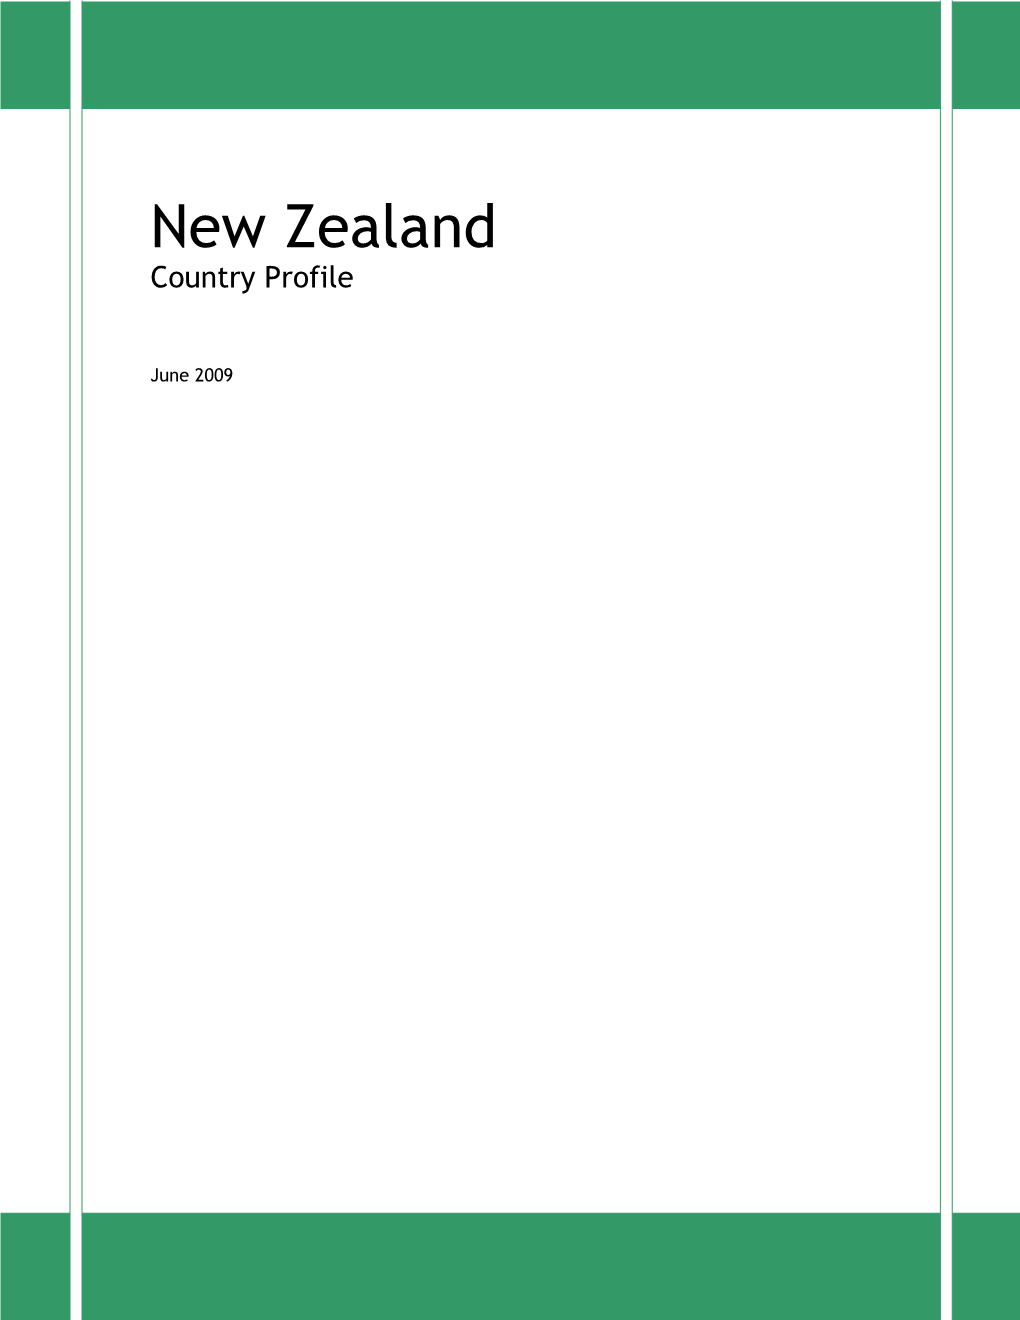 New Zealand Country Profile